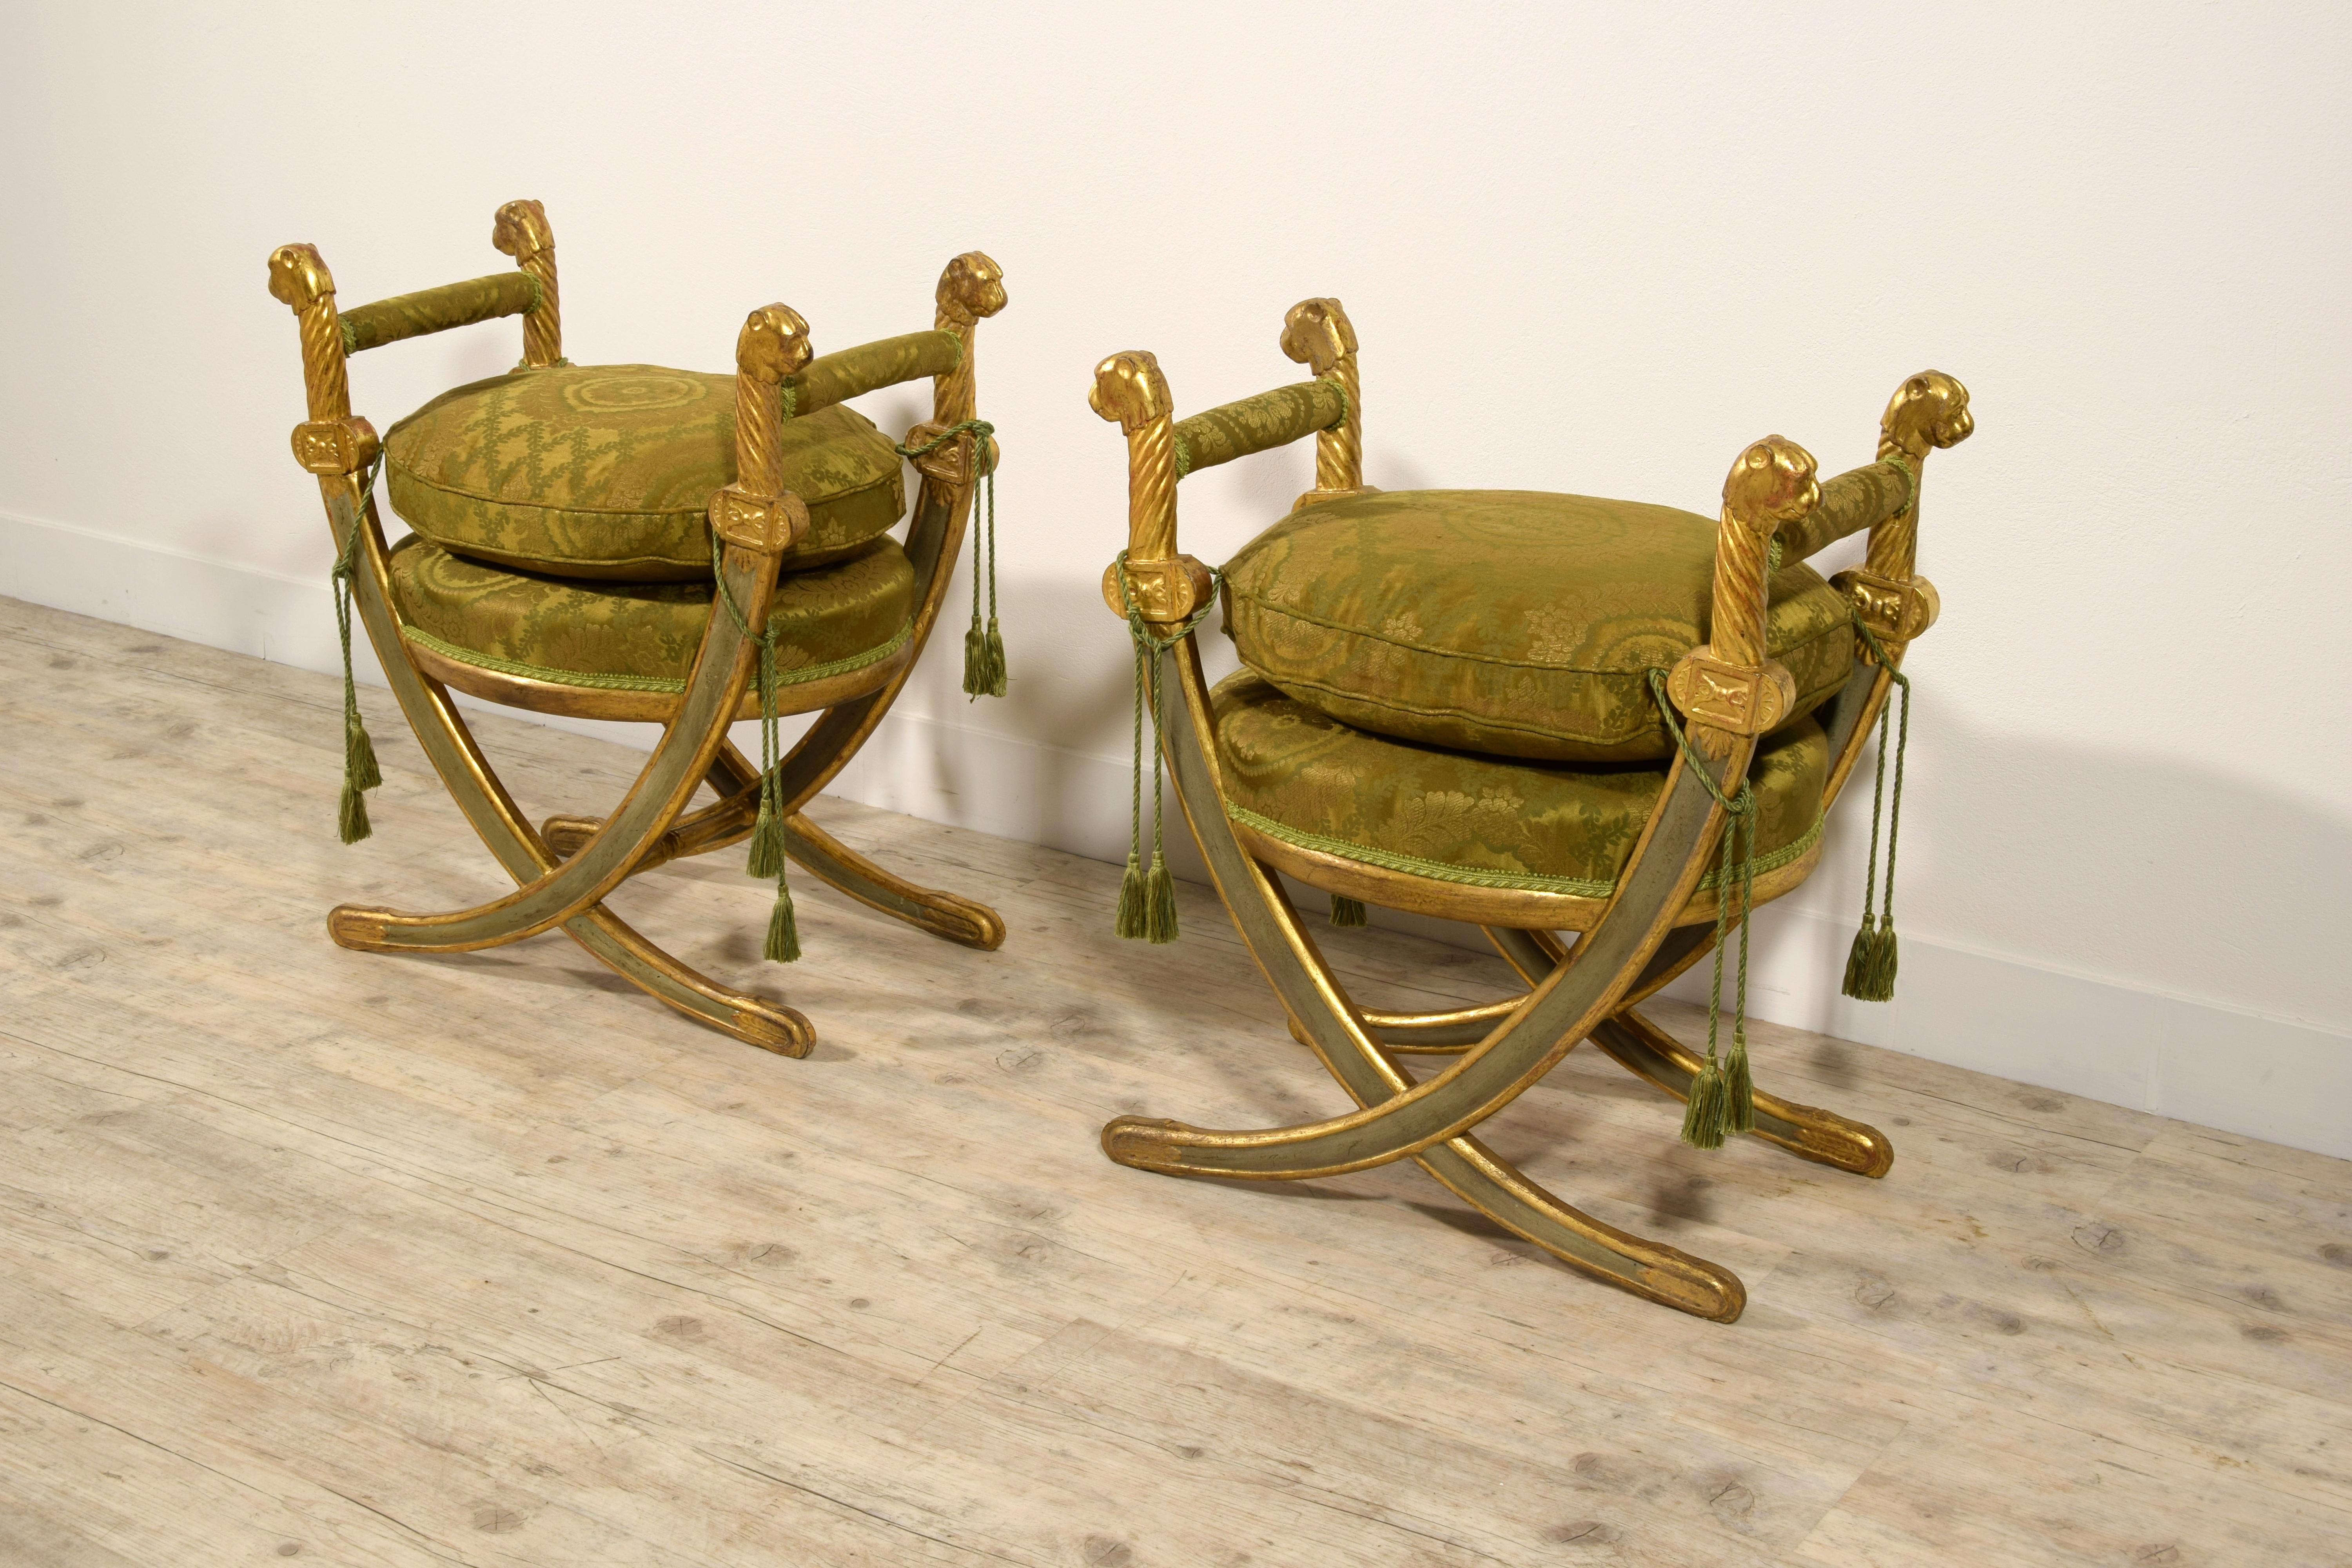 20th Century, Pair of Neoclassical Italian Carved Lacquered Gilt Wood Stools For Sale 4